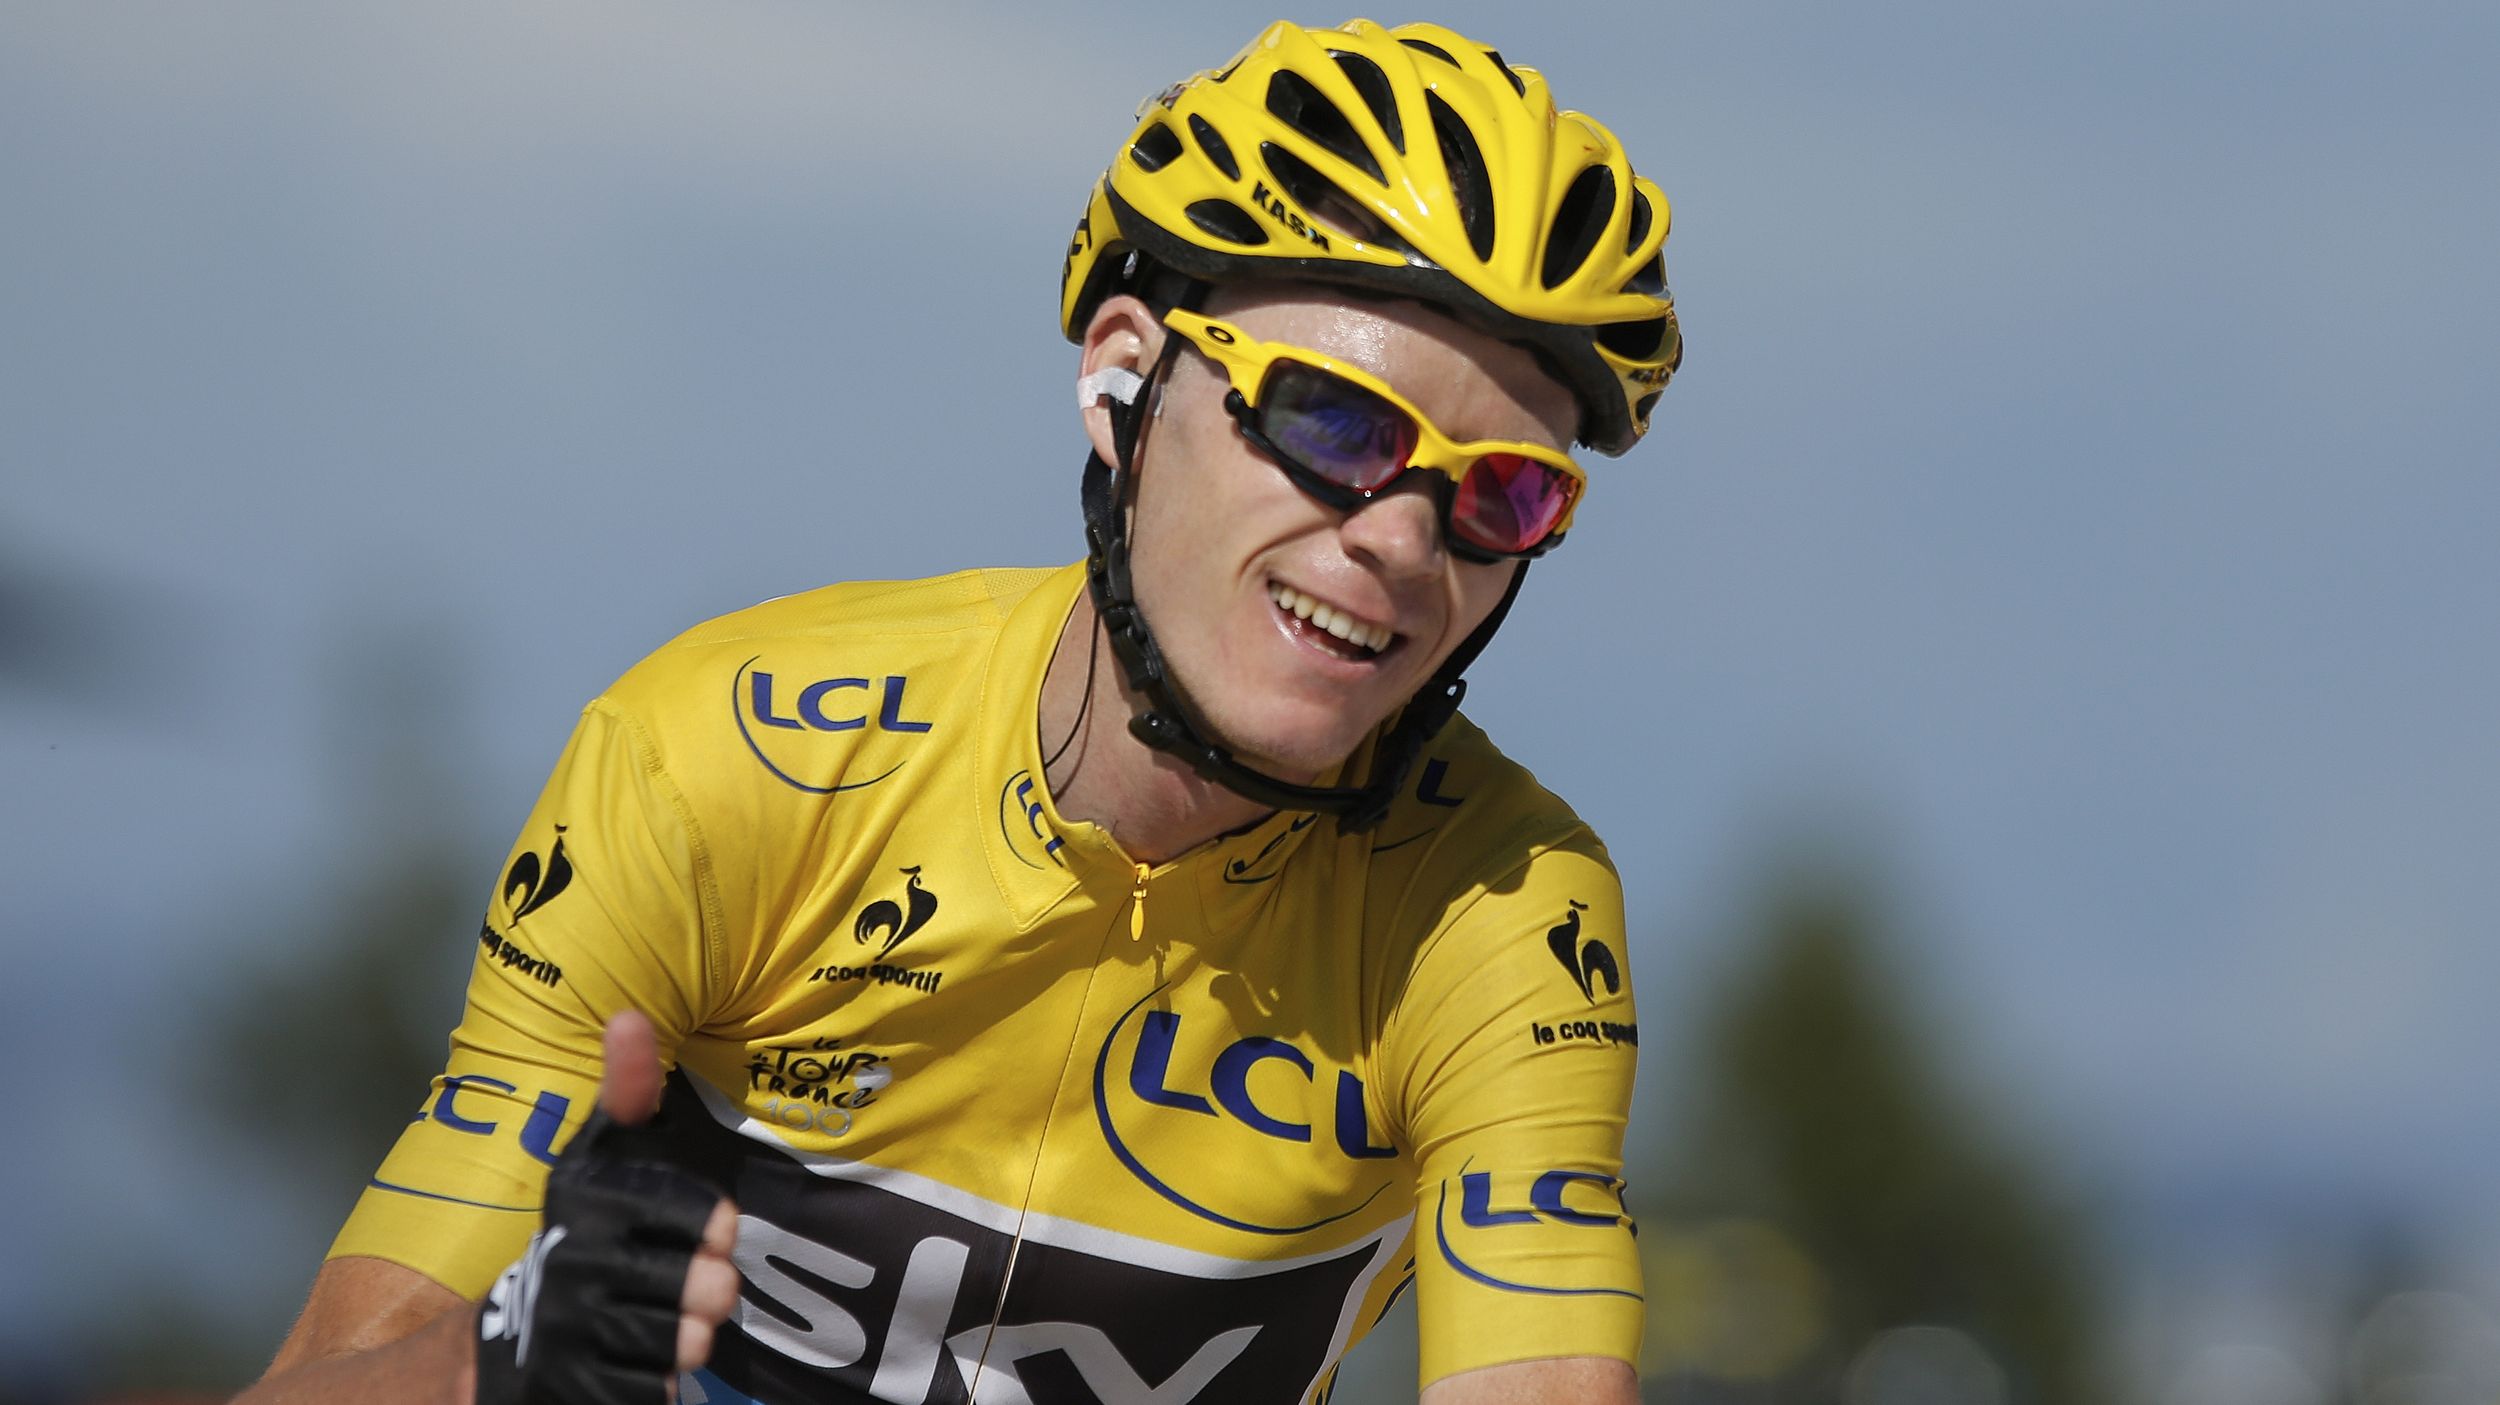 Break out the With one stage left, Britain's Chris Froome effectively Tour de France title | The Spokesman-Review